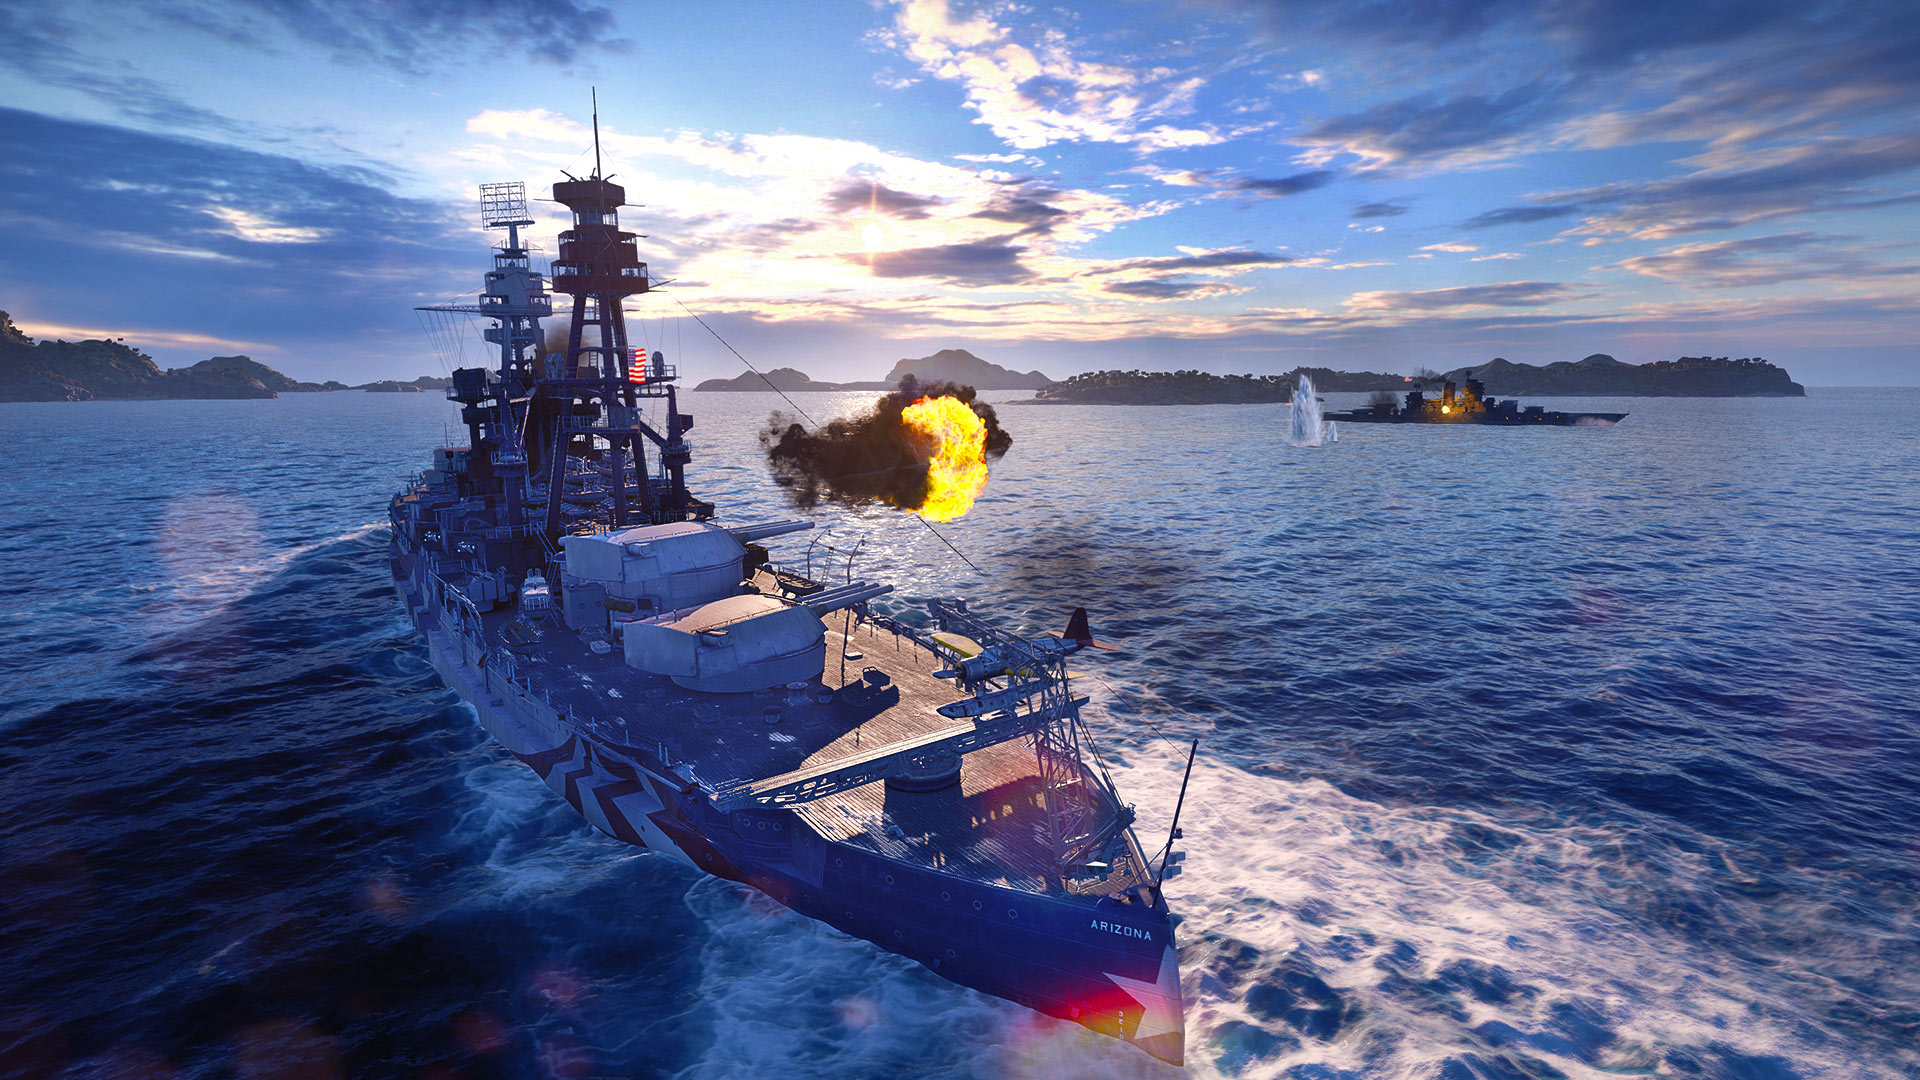 how to sell ships in world of warships legends ps4